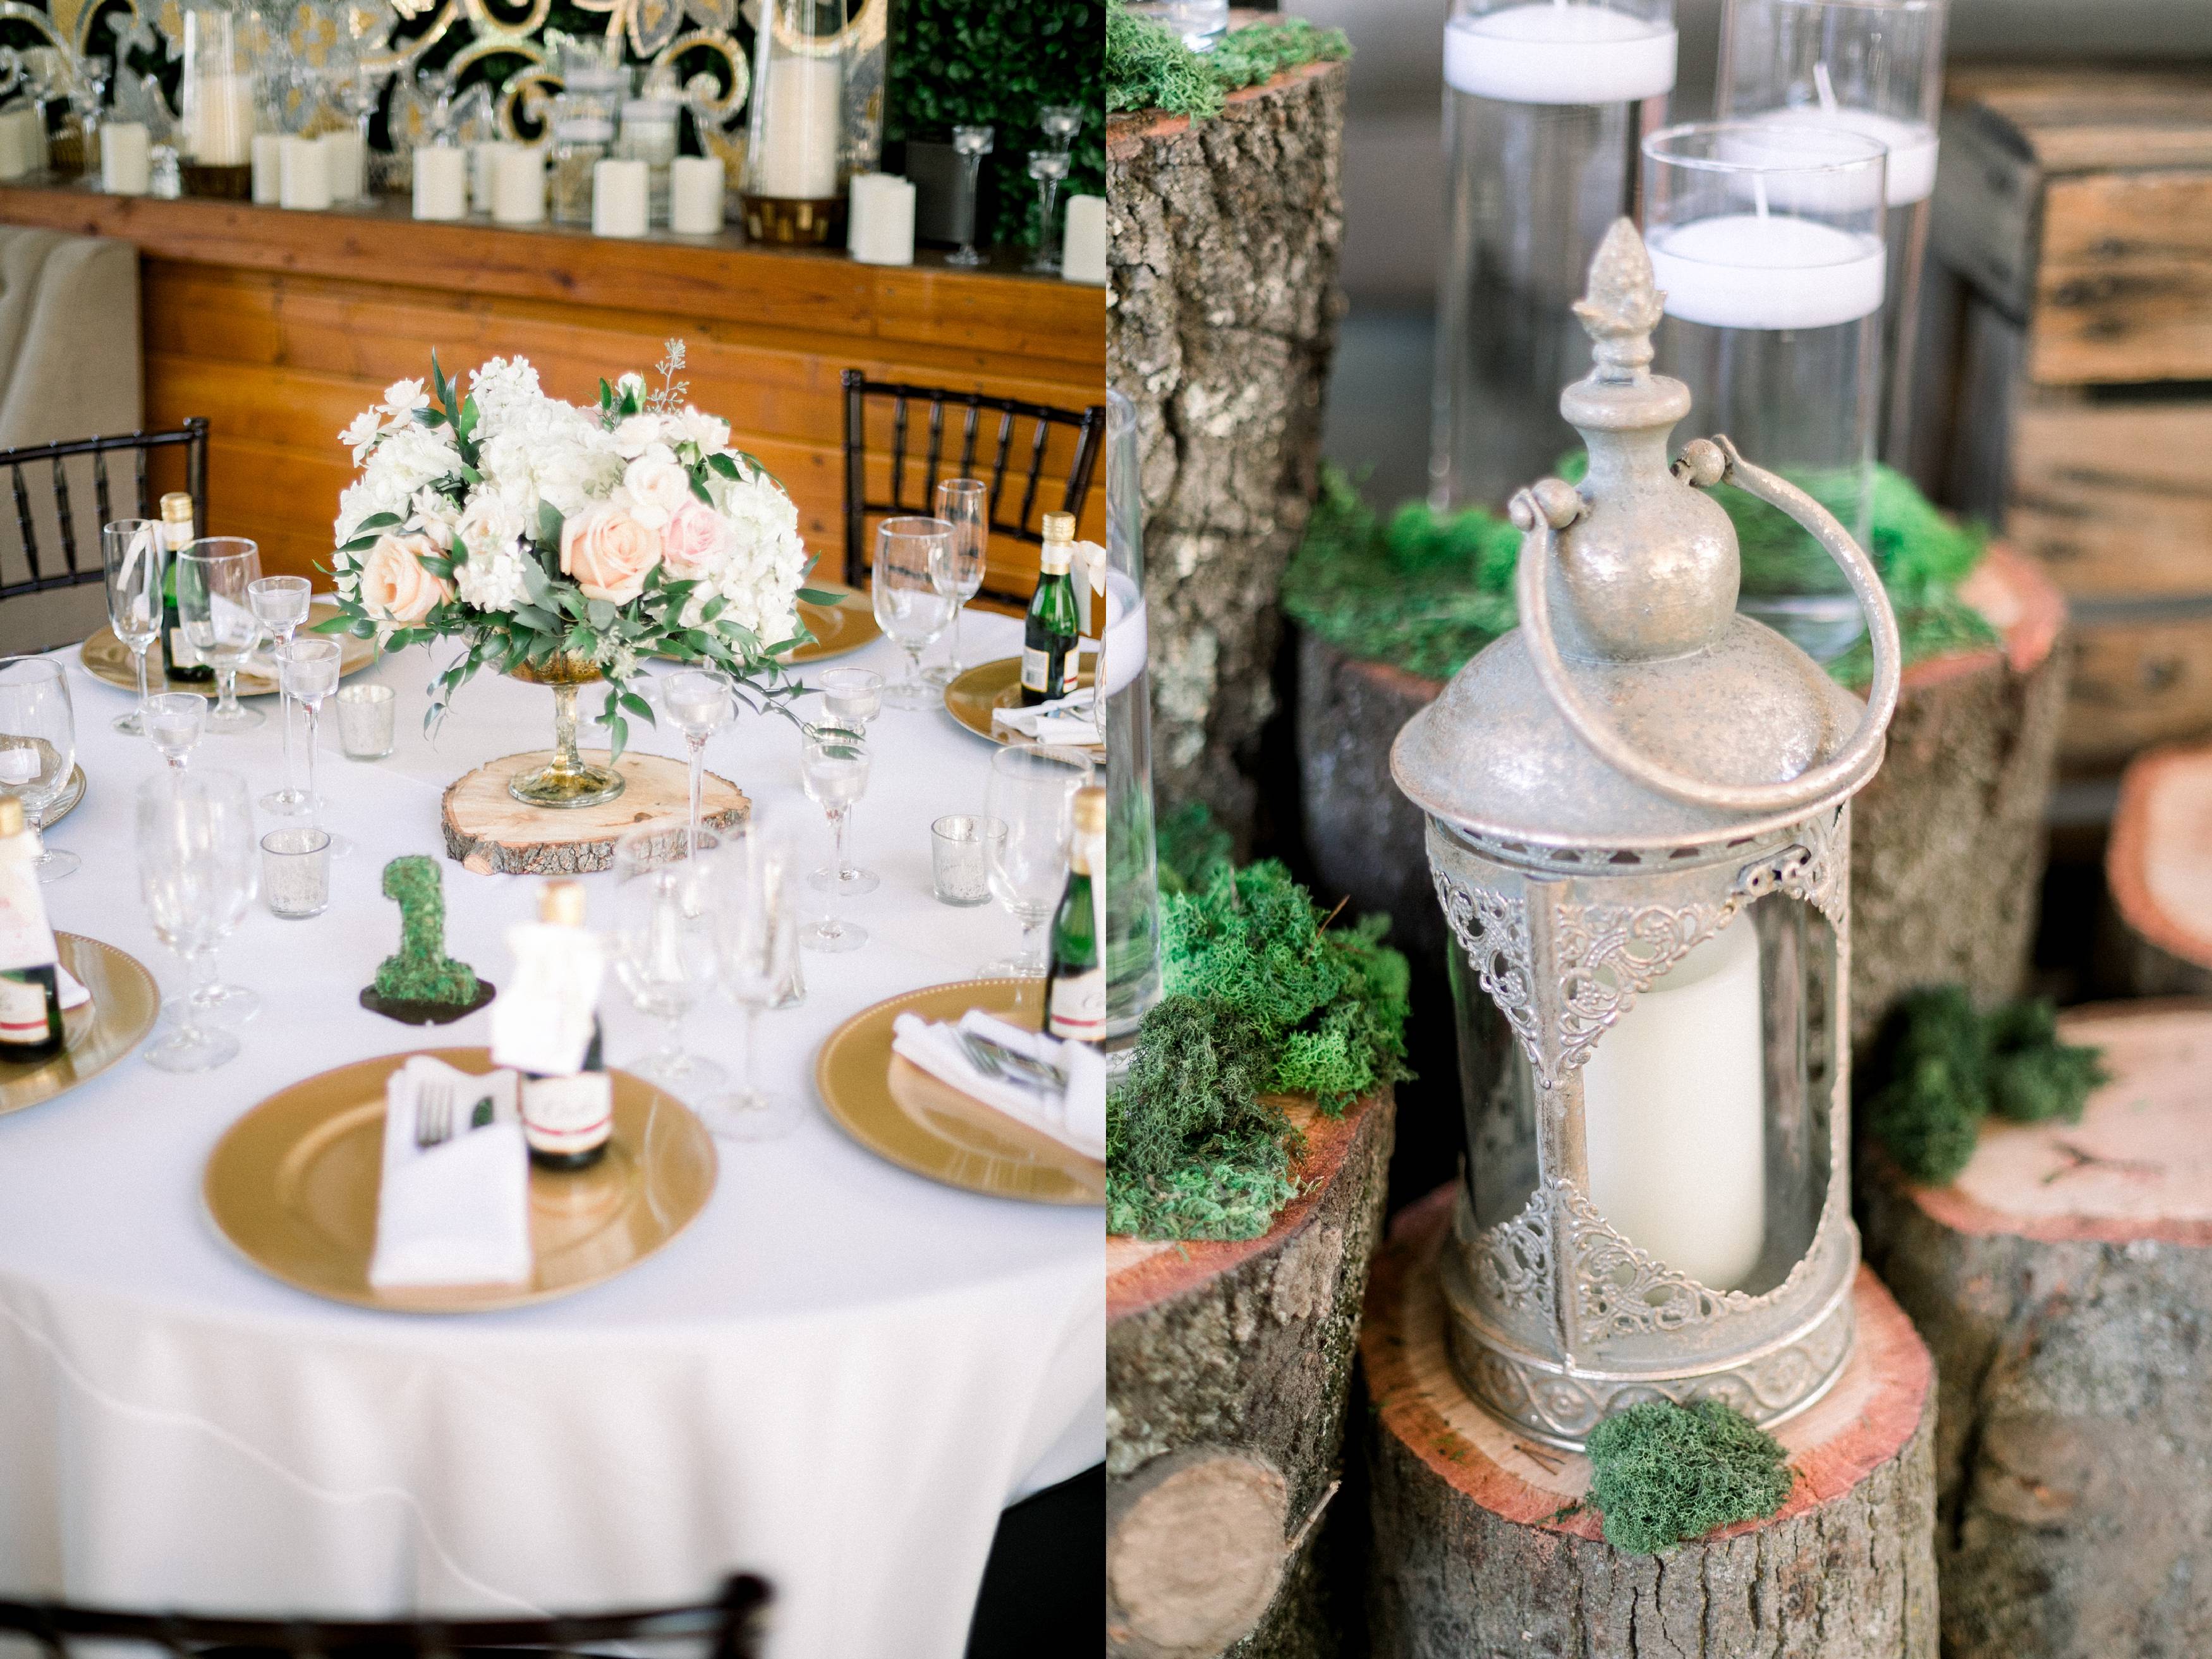 Moss wedding details with lanterns and candles for wedding reception